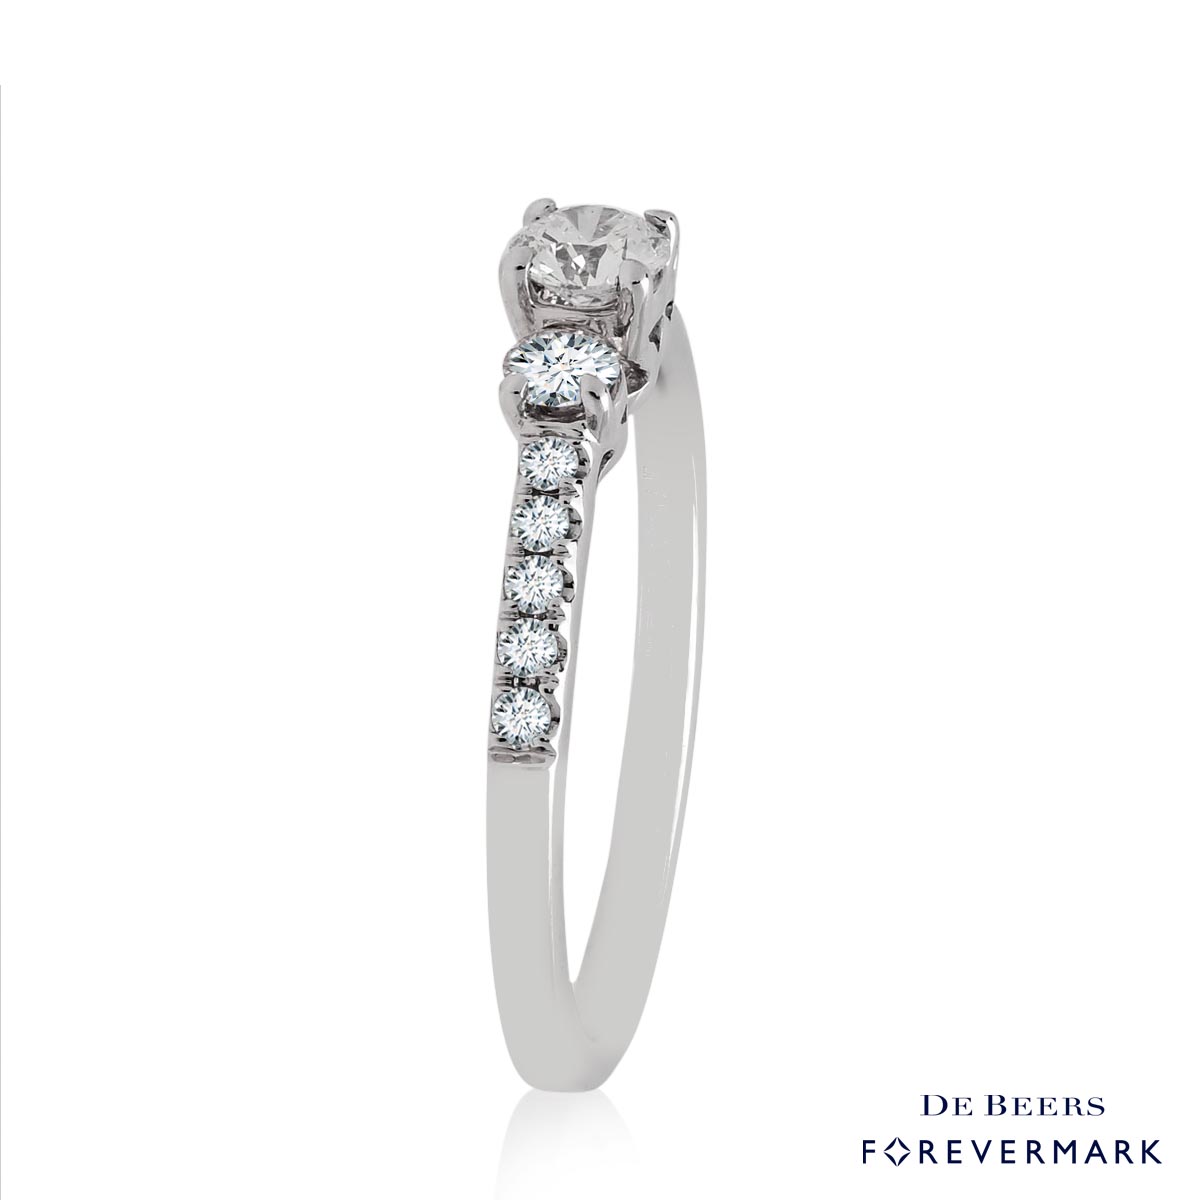 De Beers Forevermark Three Stone Diamond Ring in 18kt White Gold (1/2ct tw)